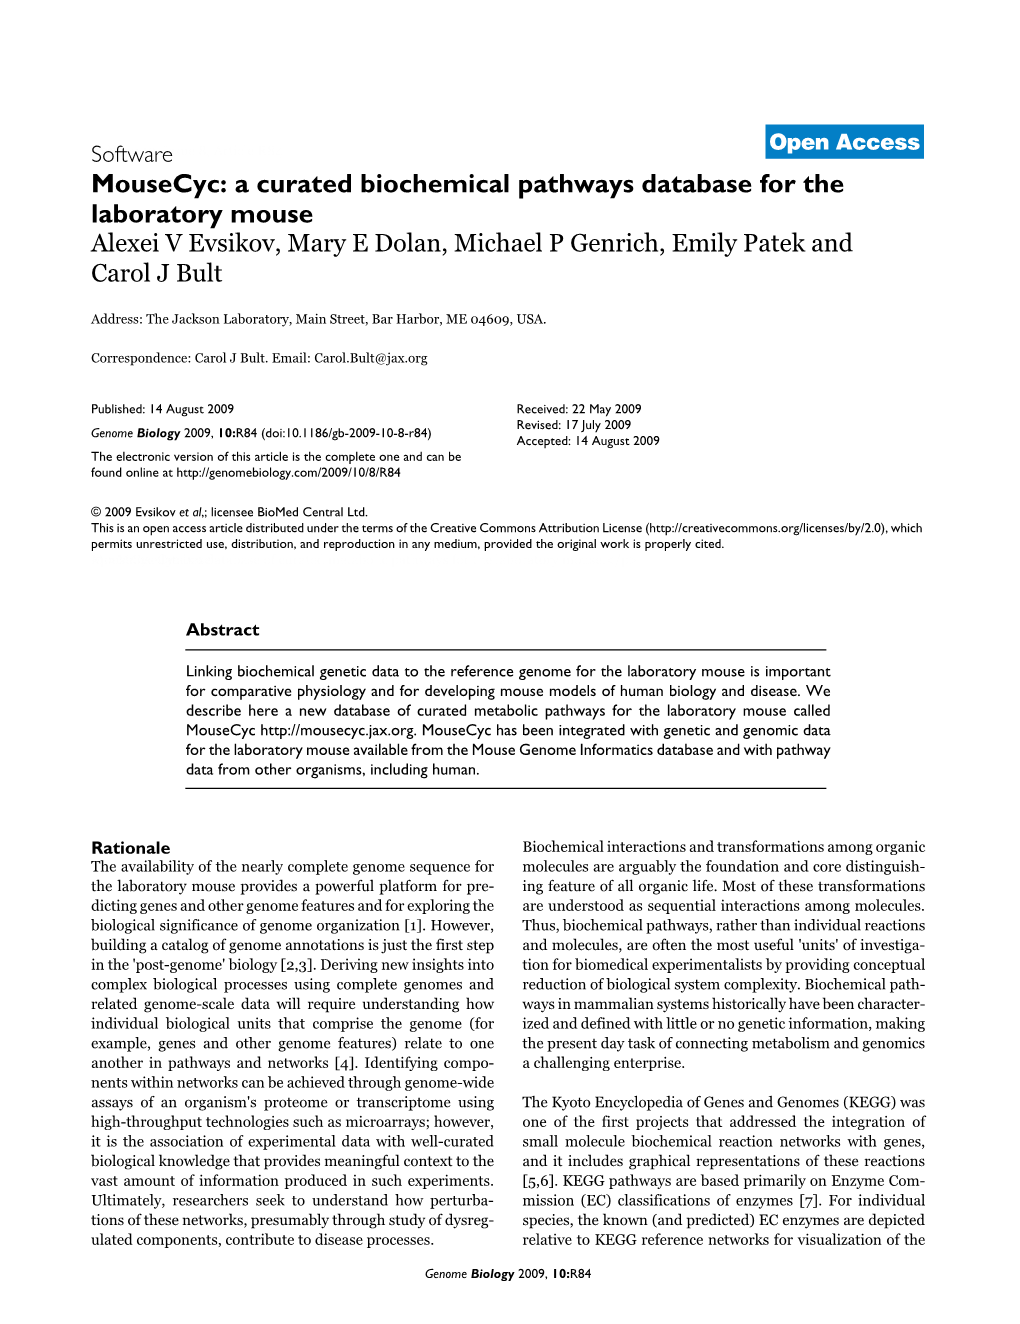 A Curated Biochemical Pathways Database for the Laboratory Mouse Alexei V Evsikov, Mary E Dolan, Michael P Genrich, Emily Patek and Carol J Bult